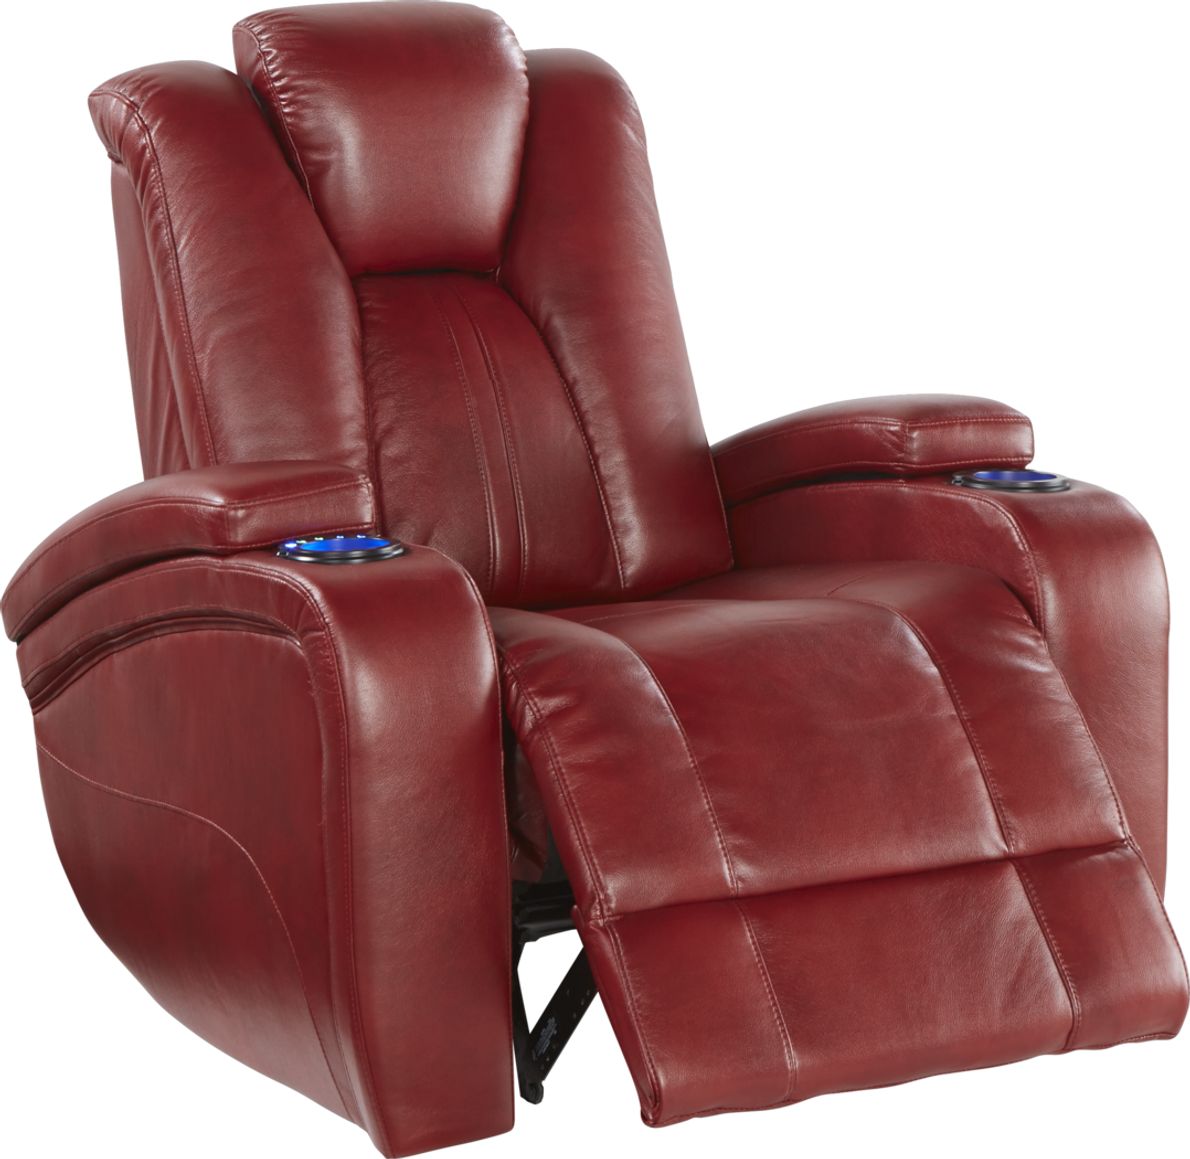 Kingvale Red Power Recliner Rooms To Go